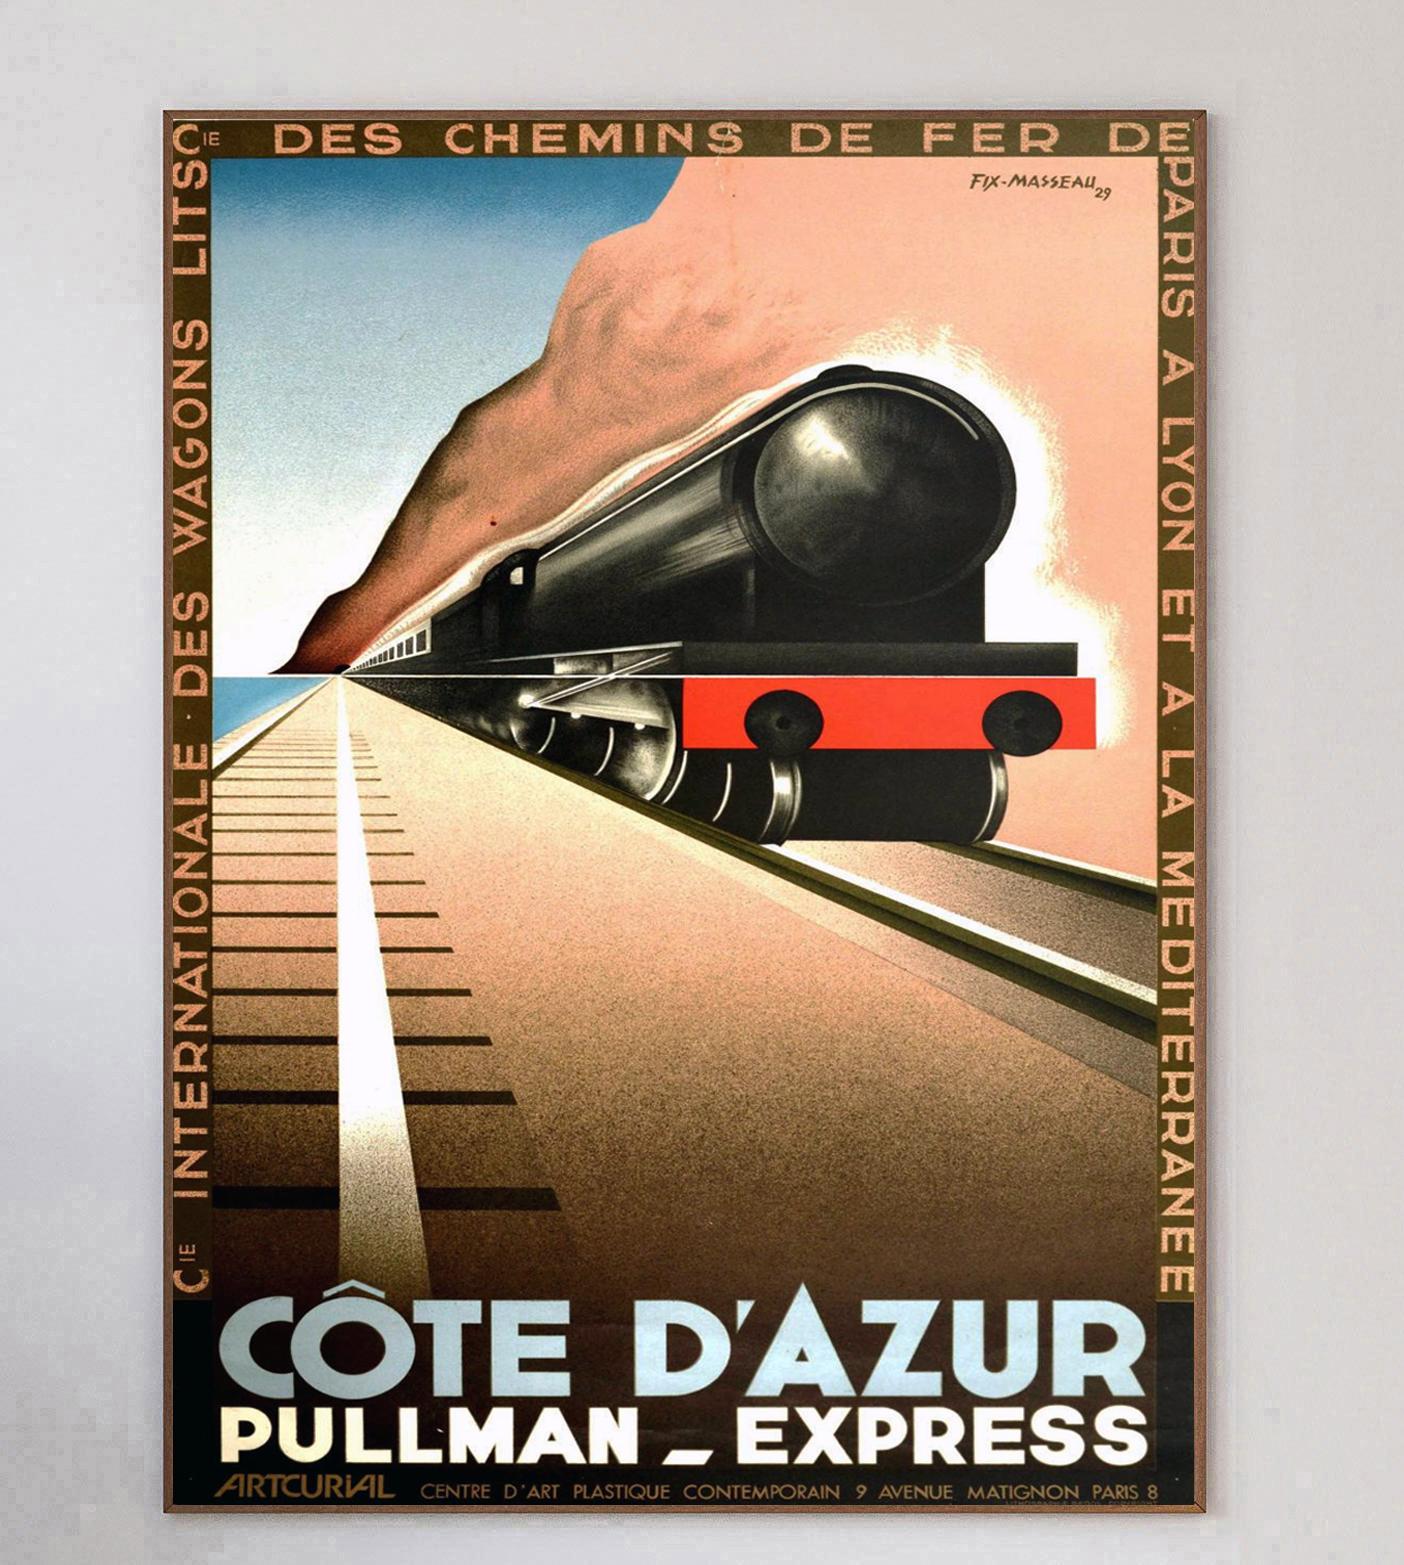 This gorgeous & rare stone lithograph poster was designed by the great French poster artist Fix Masseau and released in 1982.

Promoting the Cote d'Azur Pullman Express train line which ran from 1929 to 1939, this stunning art deco design depicts